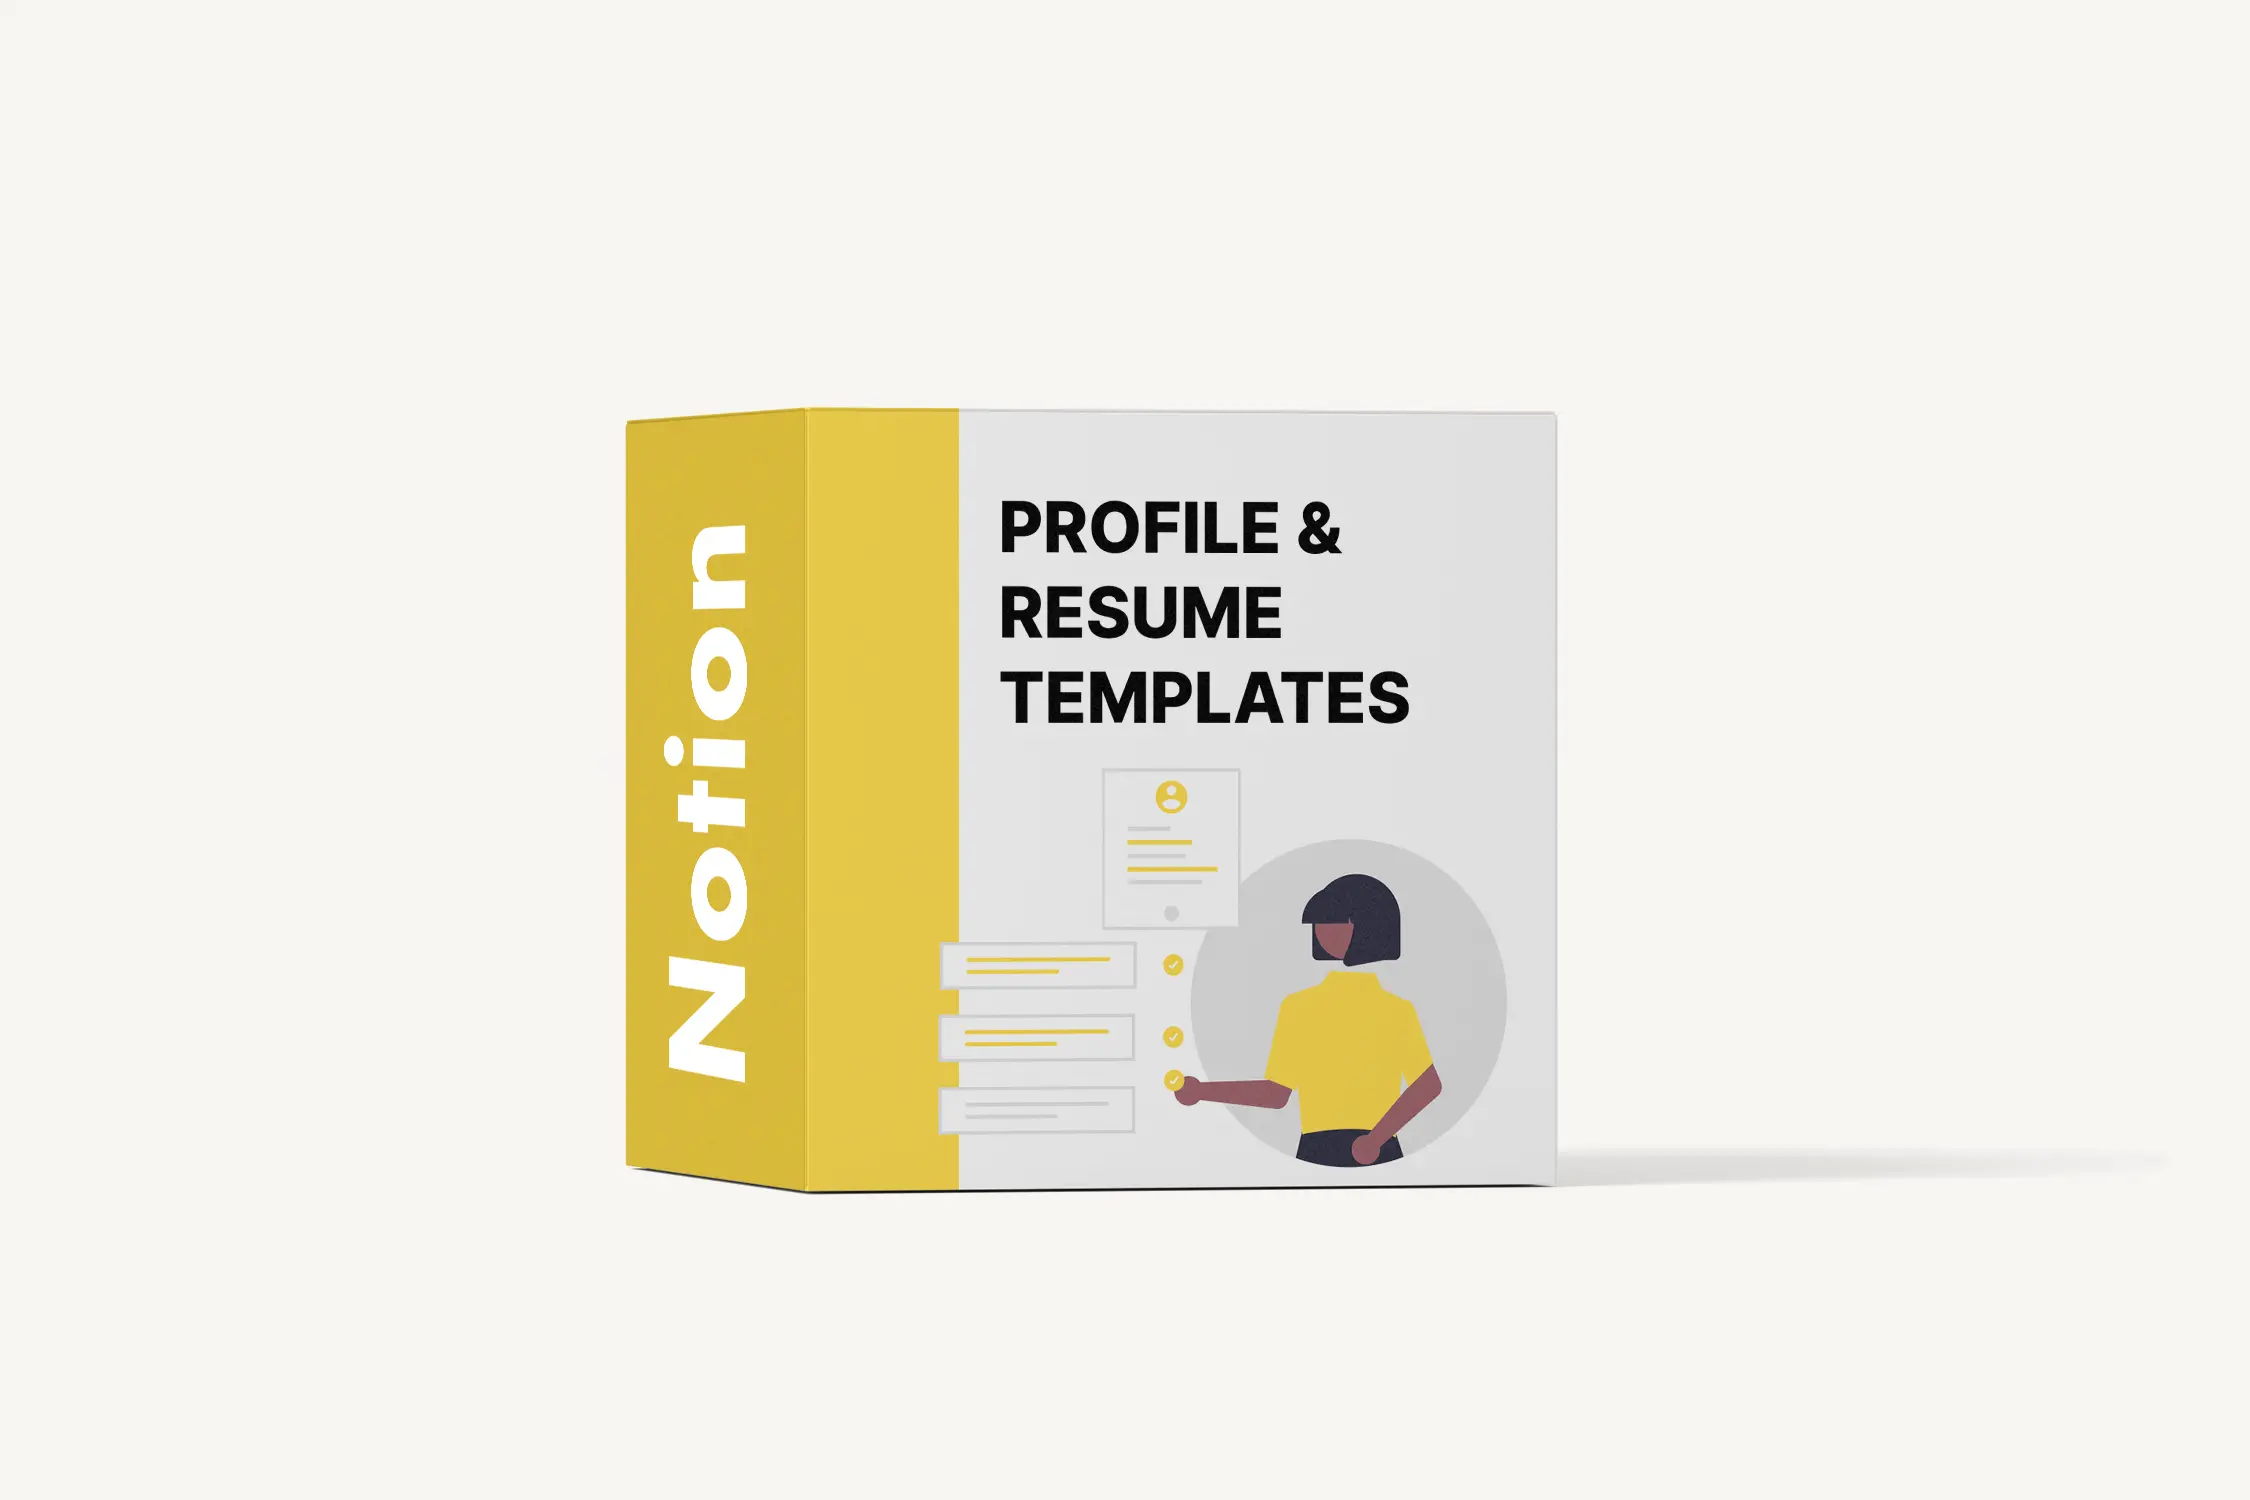 Limitless Profile & Resume Notion Template image